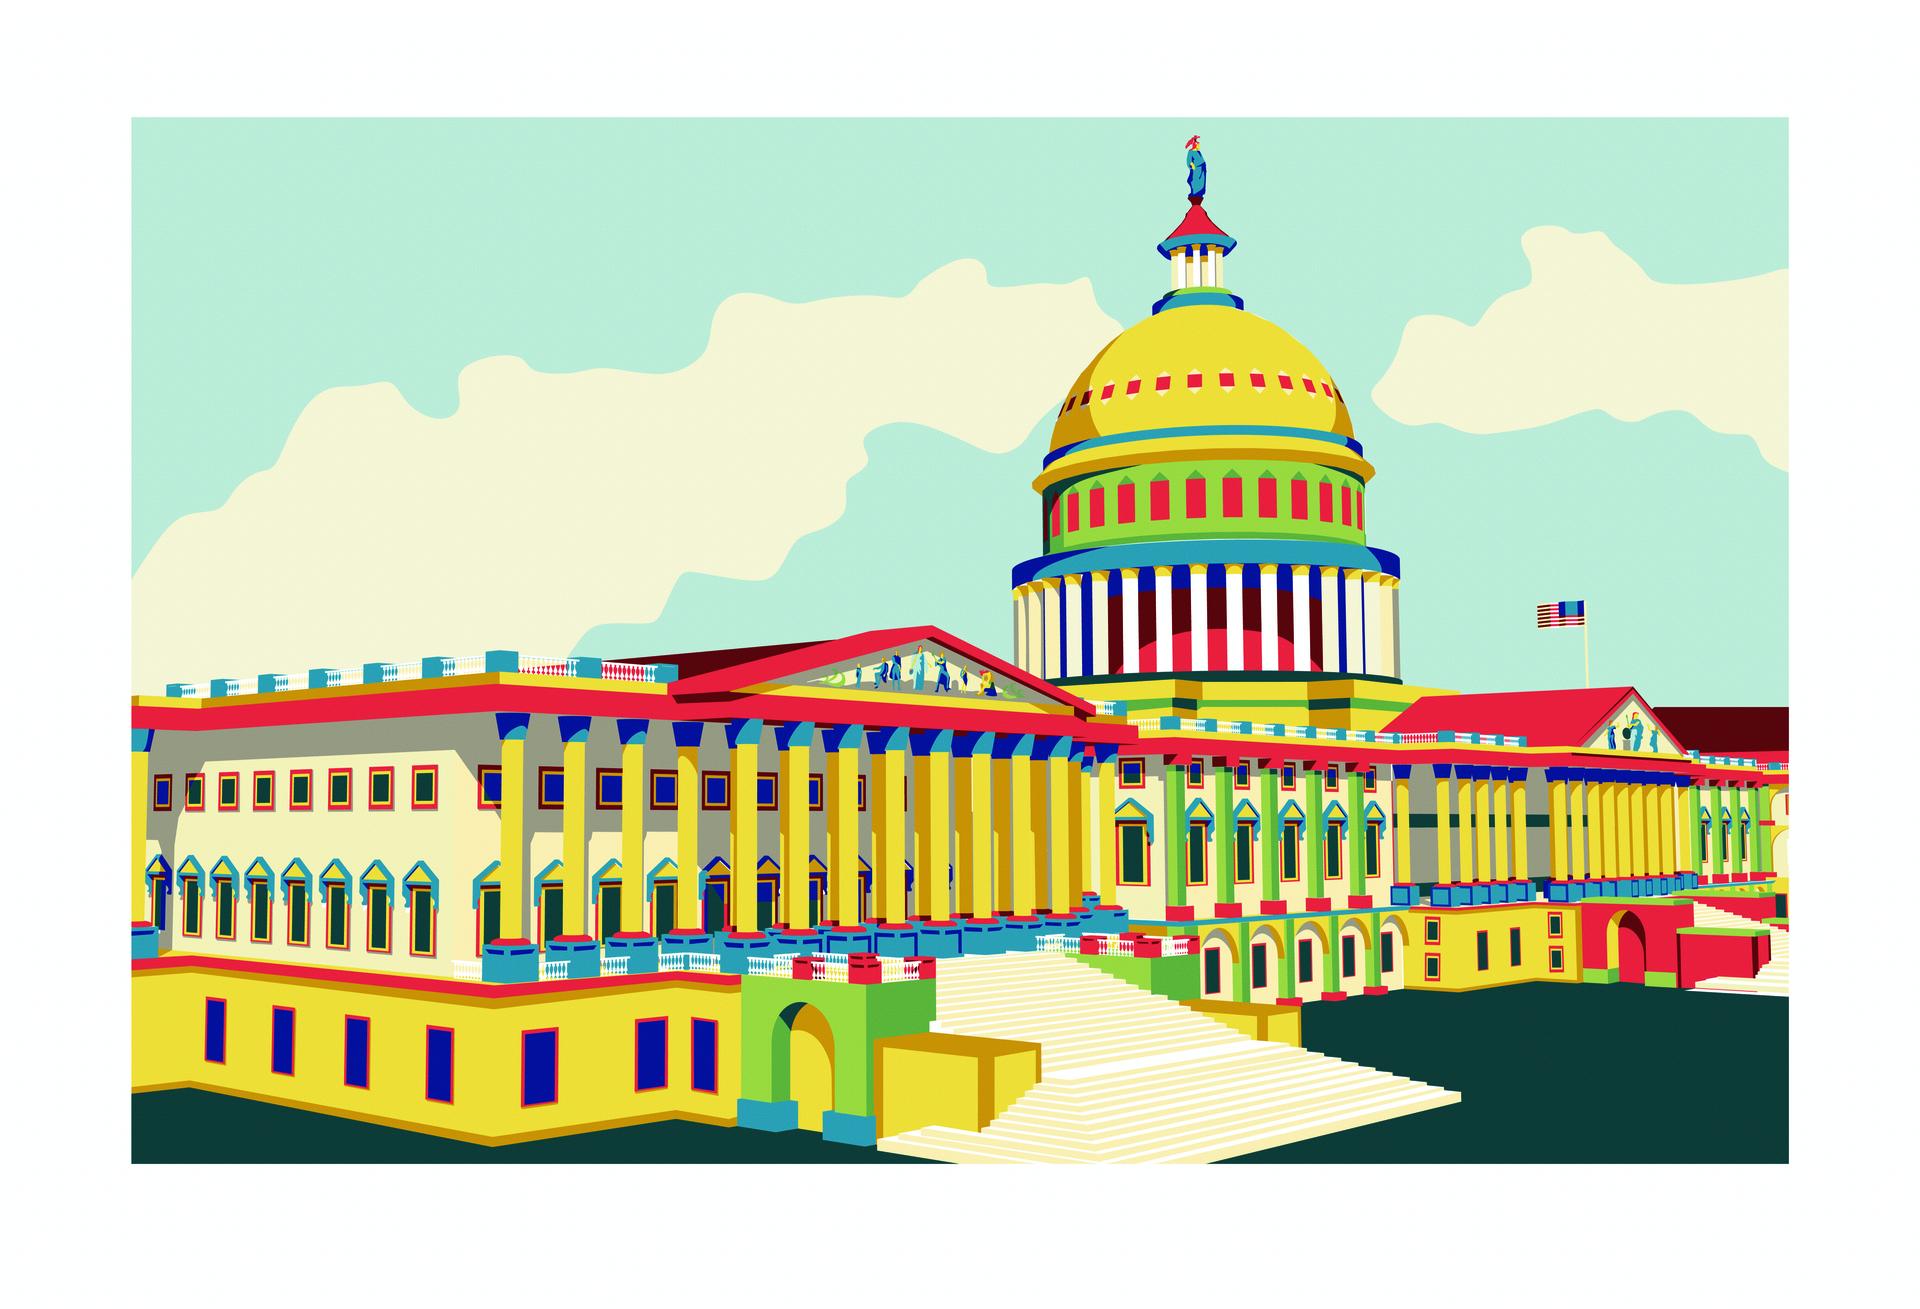 U.S. Capitol Building in a vibrant color scheme of yellow, red, blue, and green.